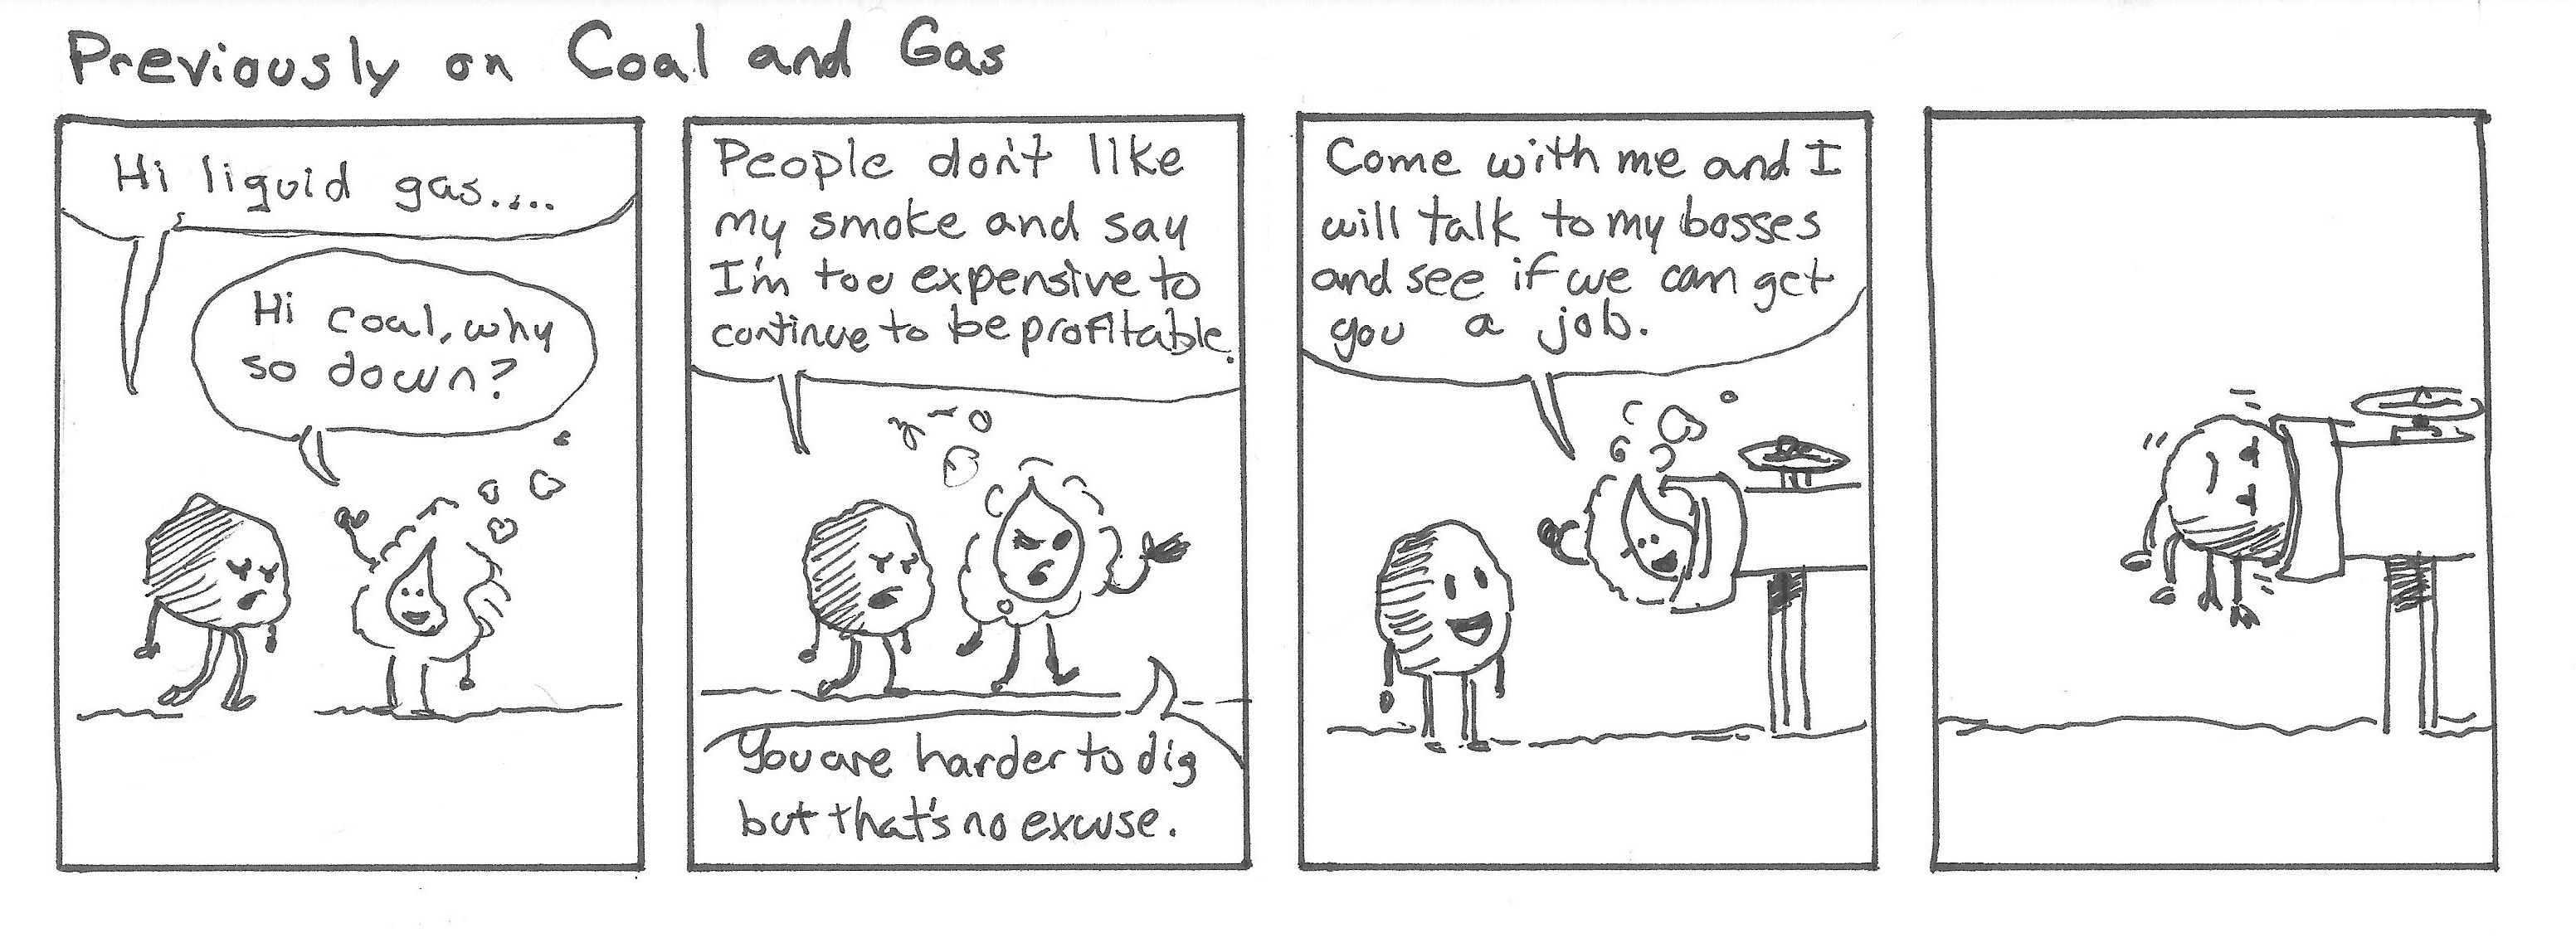 Previously on Coal and Gas...